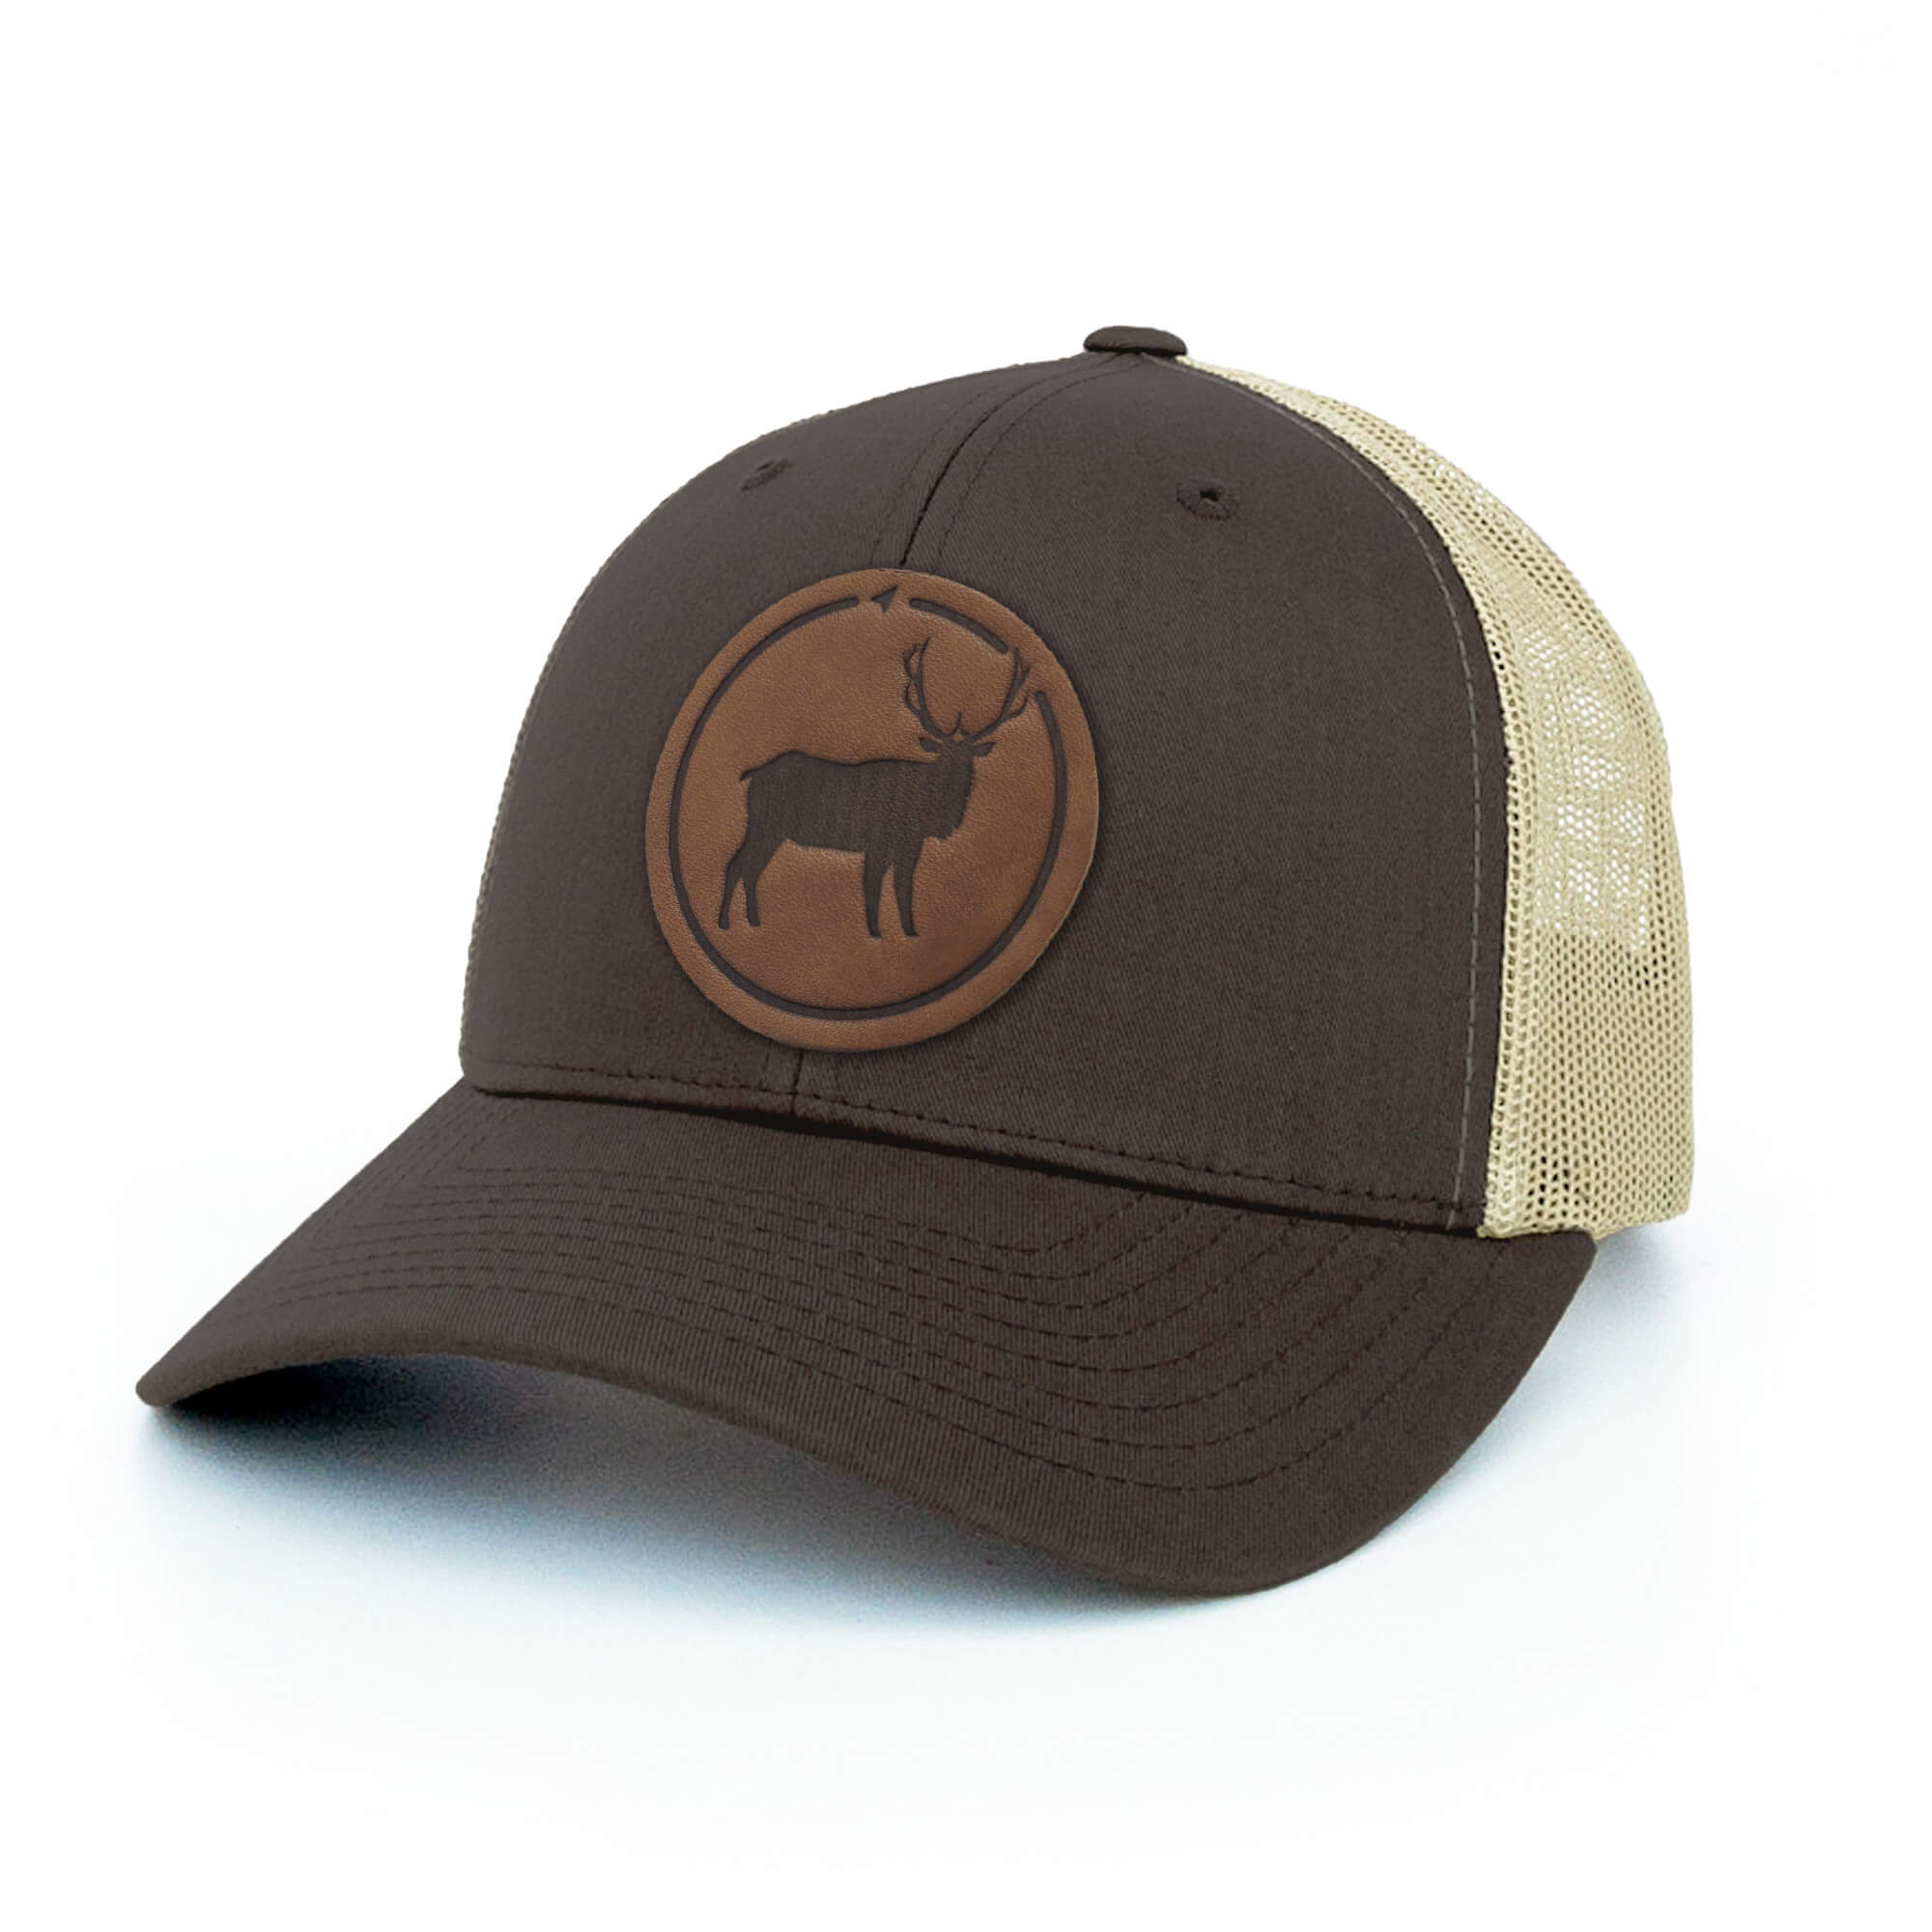 Brown and khaki trucker hat with full-grain leather patch of Elk | BLACK-004-006, CHARC-004-006, NAVY-004-006, HGREY-004-006, MOSS-004-006, BROWN-004-006